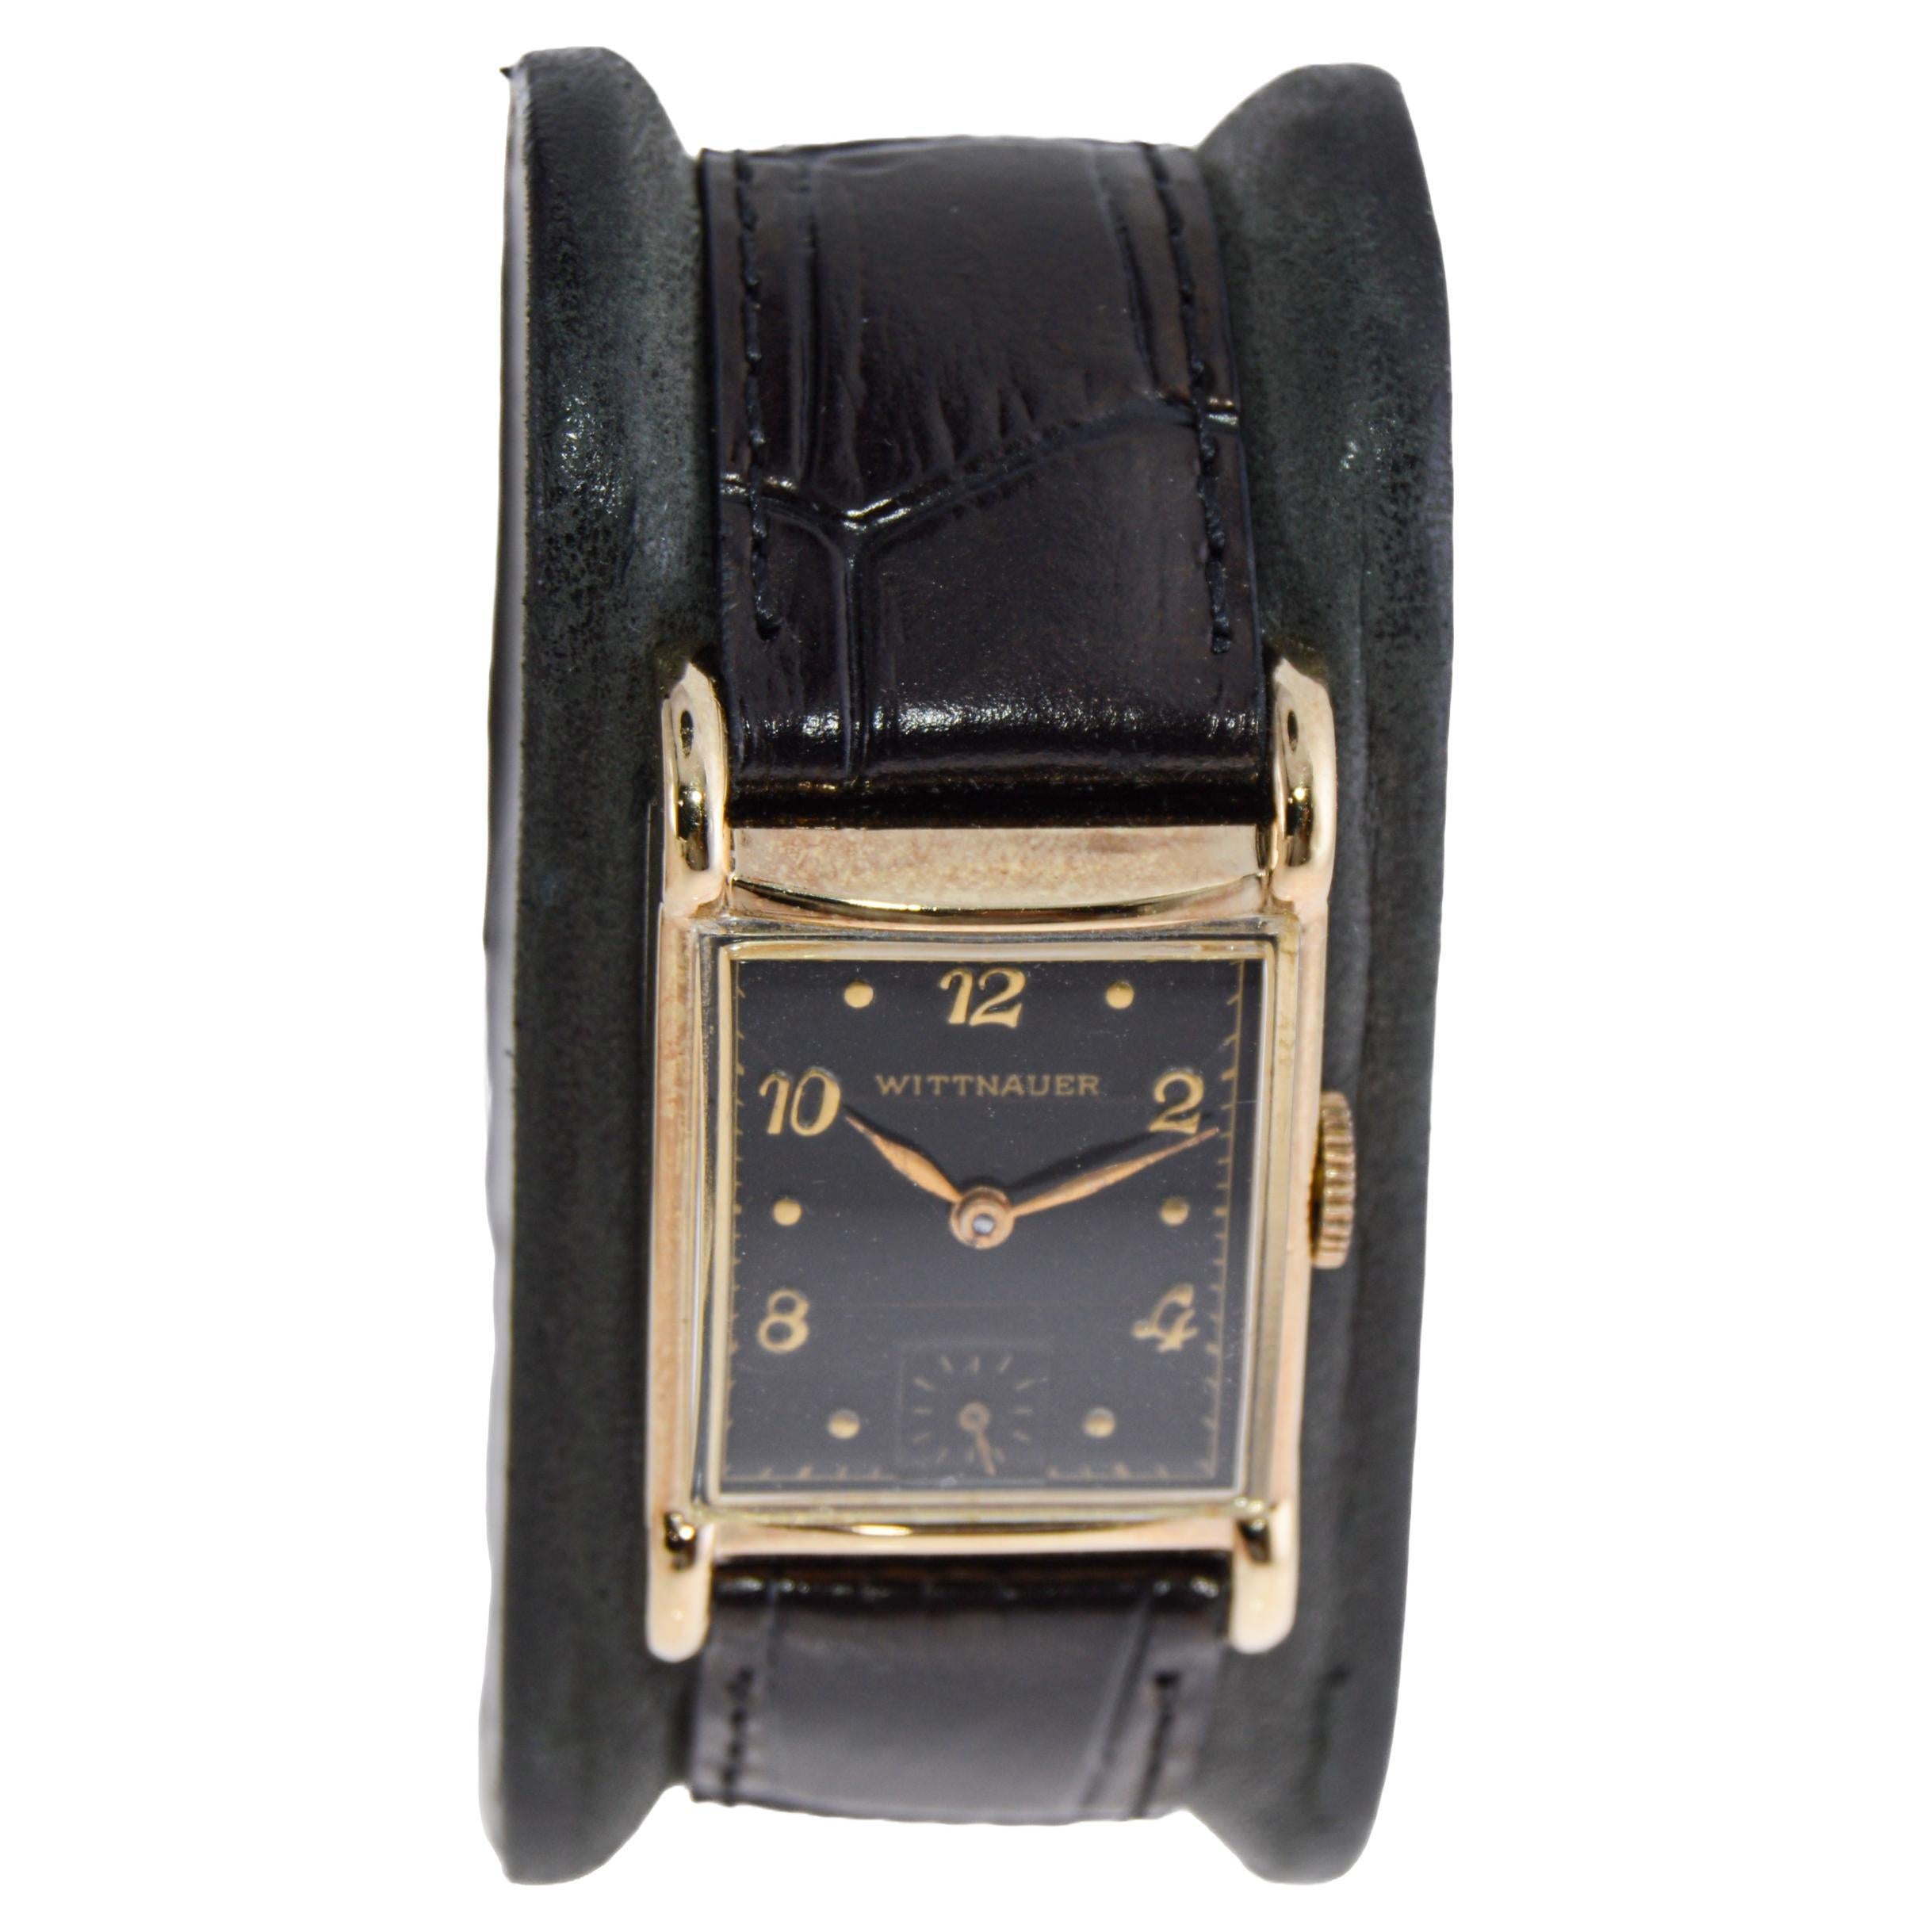 FACTORY / HOUSE: Wittnauer Watch Company
STYLE / REFERENCE: Art Deco / Tank Style
METAL / MATERIAL: Gold Filled 
DIMENSIONS / SIZE: 37mm Length X 27mm Width
MOVEMENT / CALIBER: Manual Winding / 17 Jewels / Caliber 72 Revue
DIAL / HANDS: Black Dial